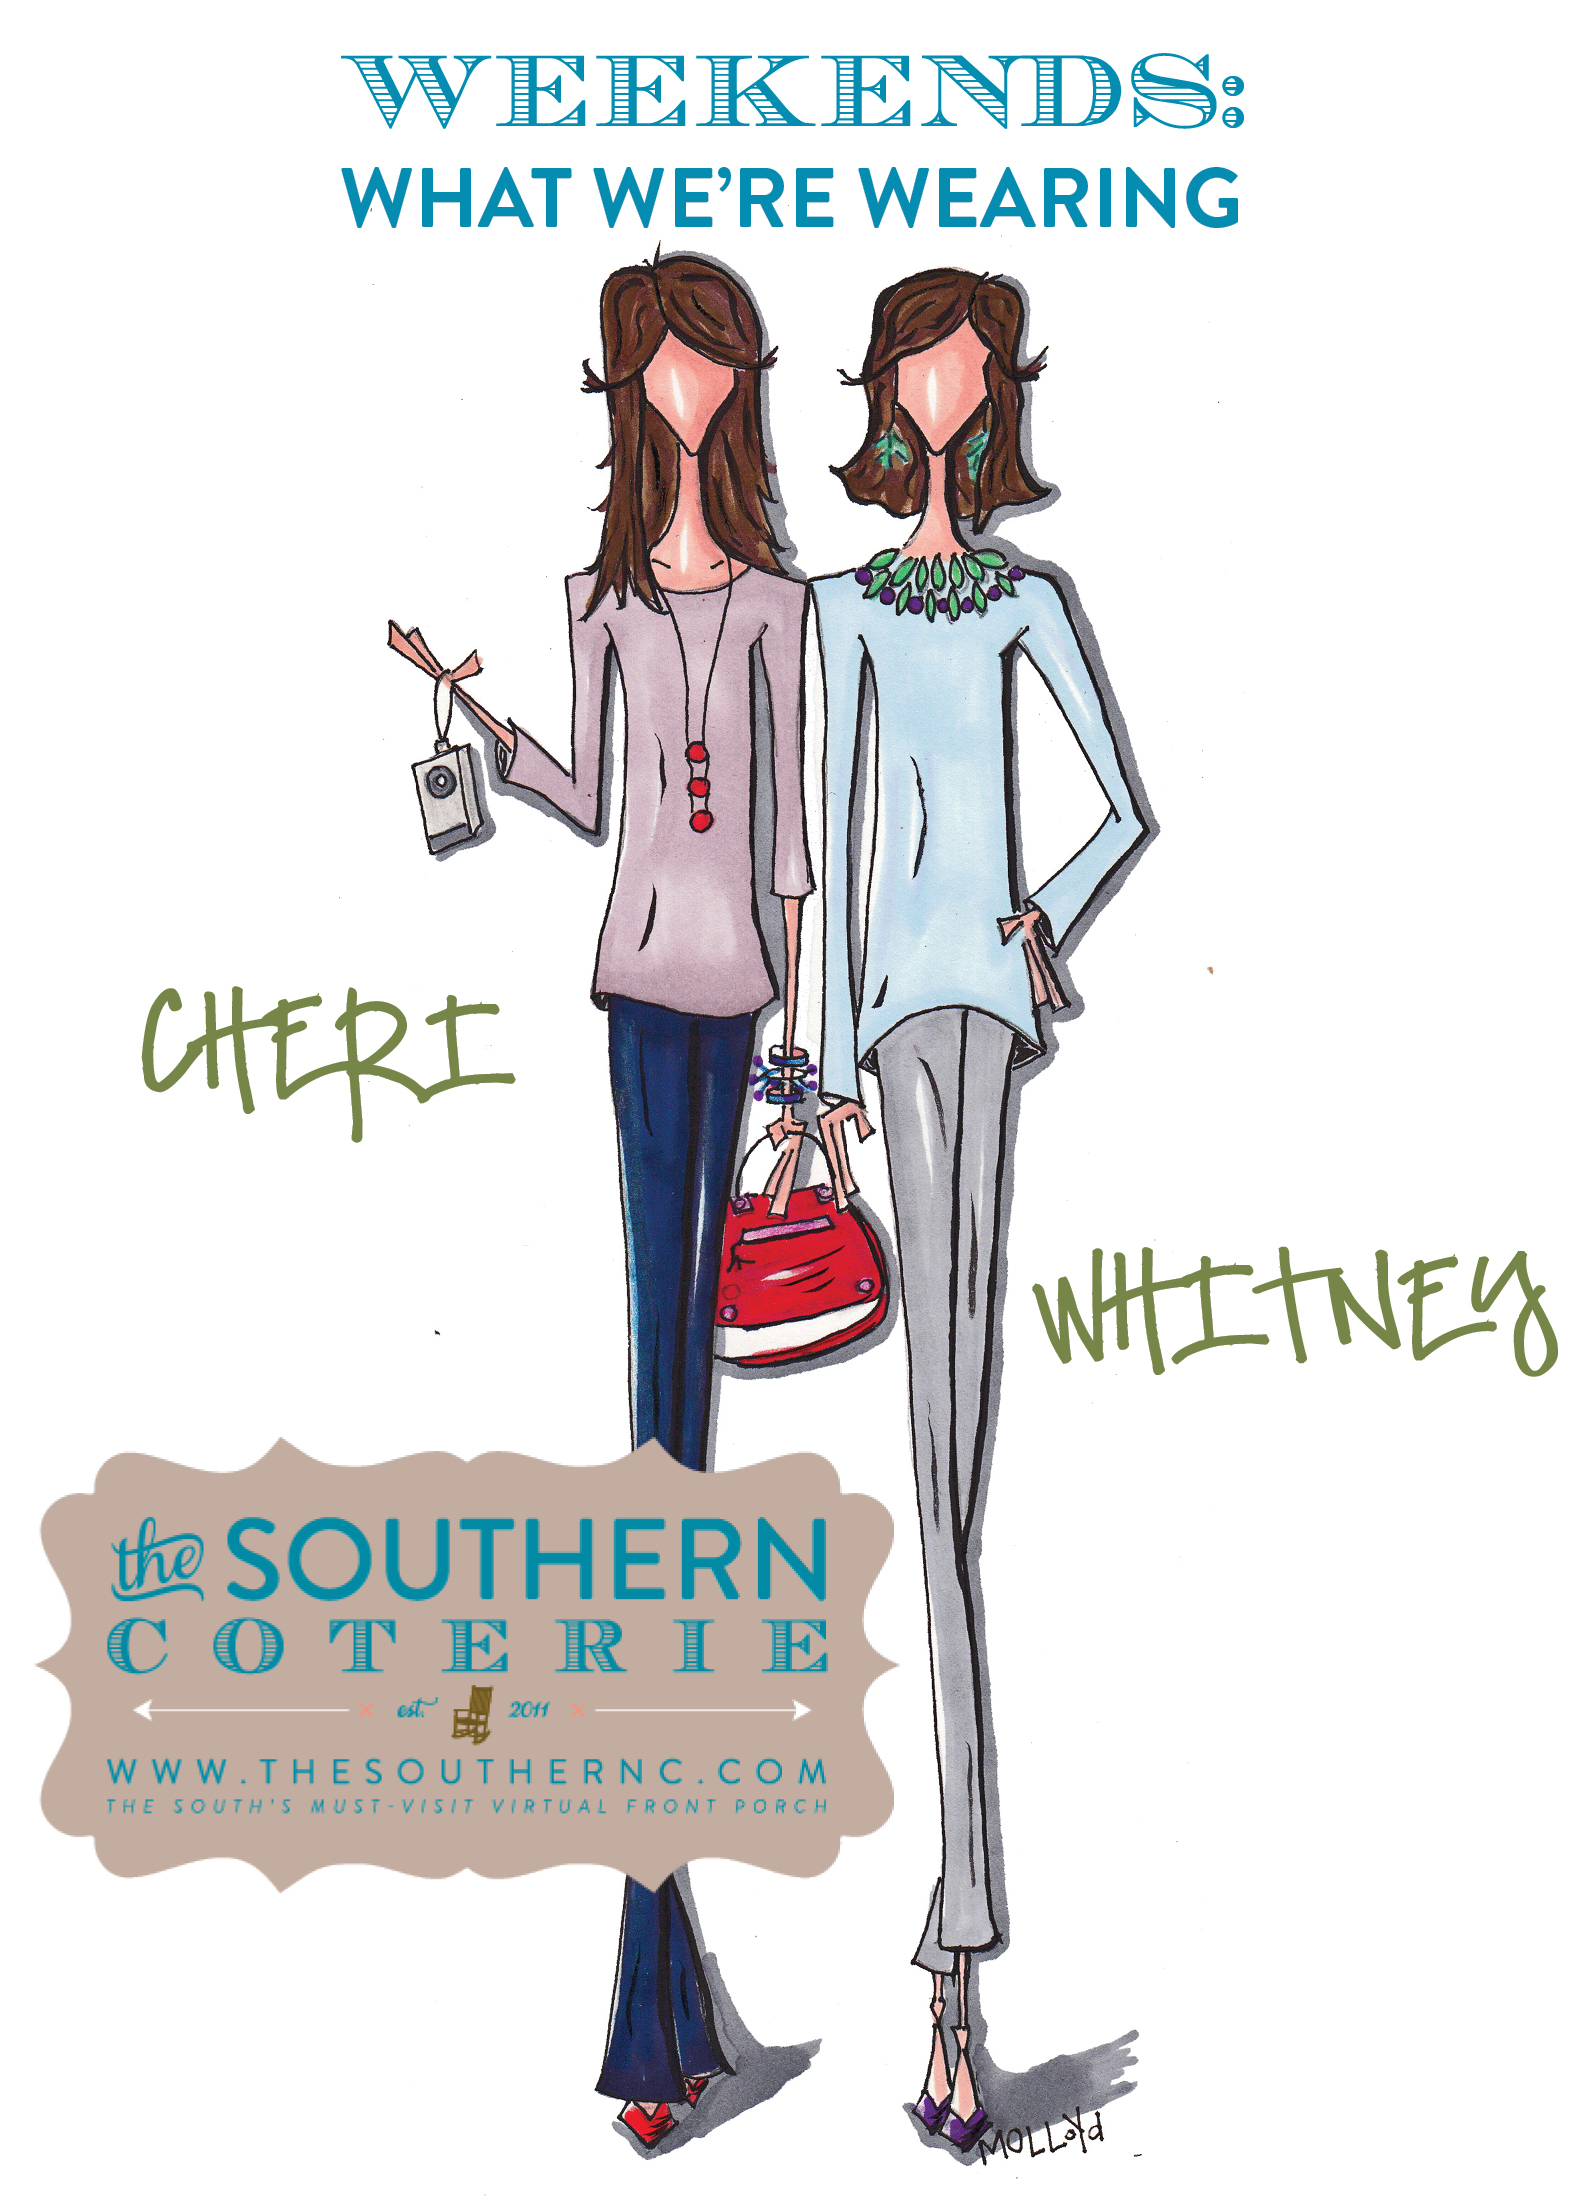 WEEKENDS: What We’re Wearing (Cheri & Whitney)